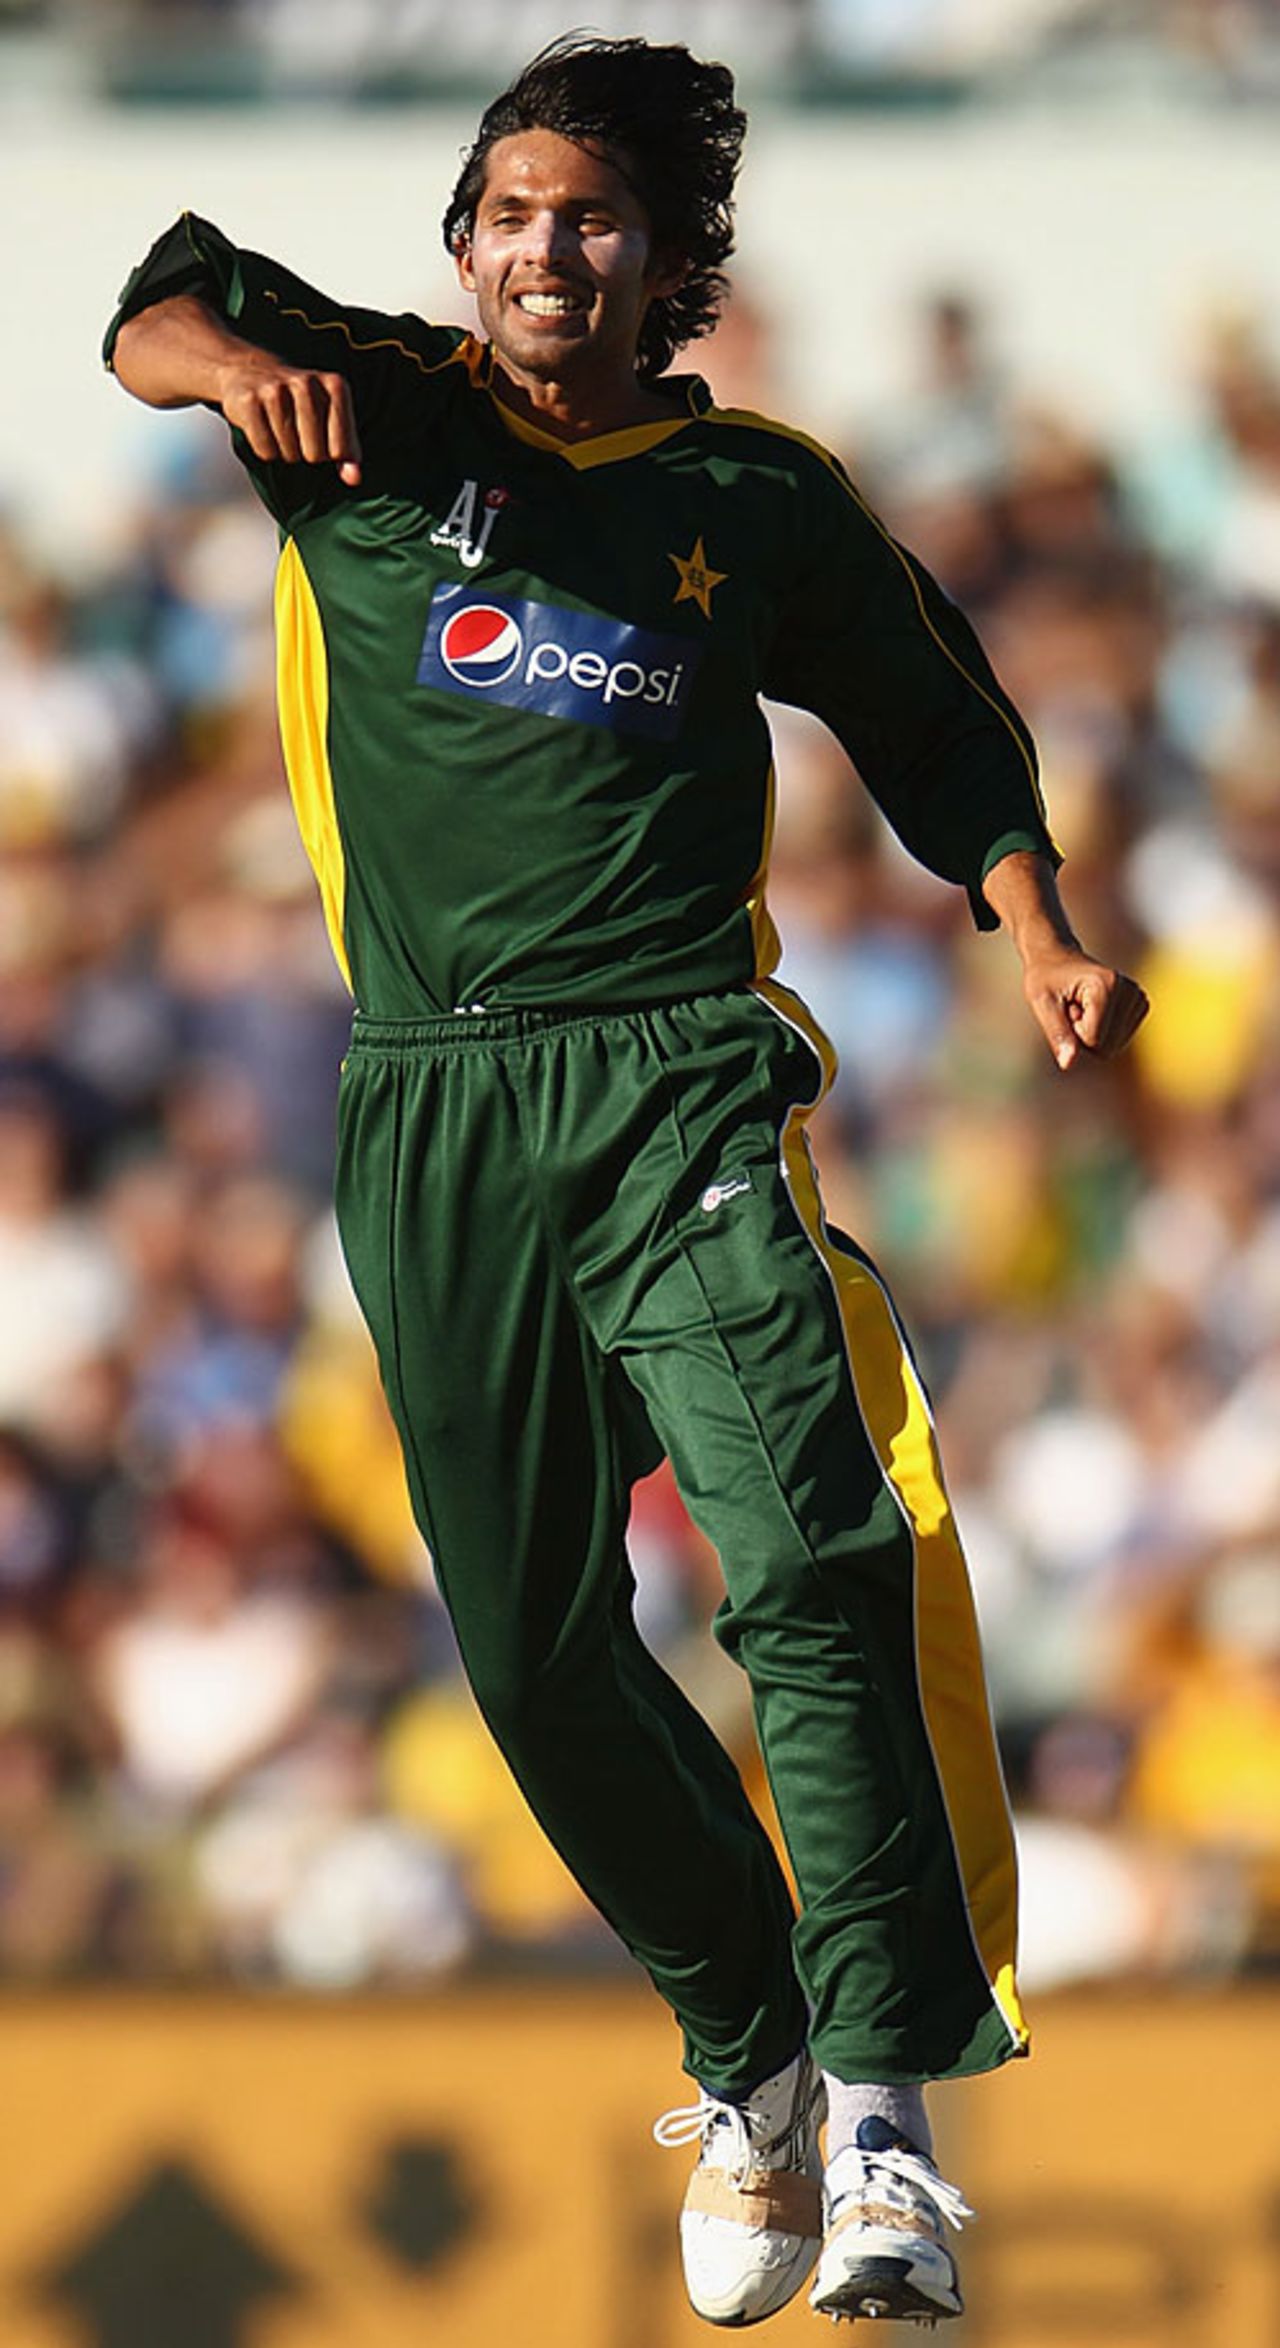 Mohammad Asif exults after accounting for Shaun Marsh, Australia v Pakistan, 5th ODI, Perth, January 31, 2010